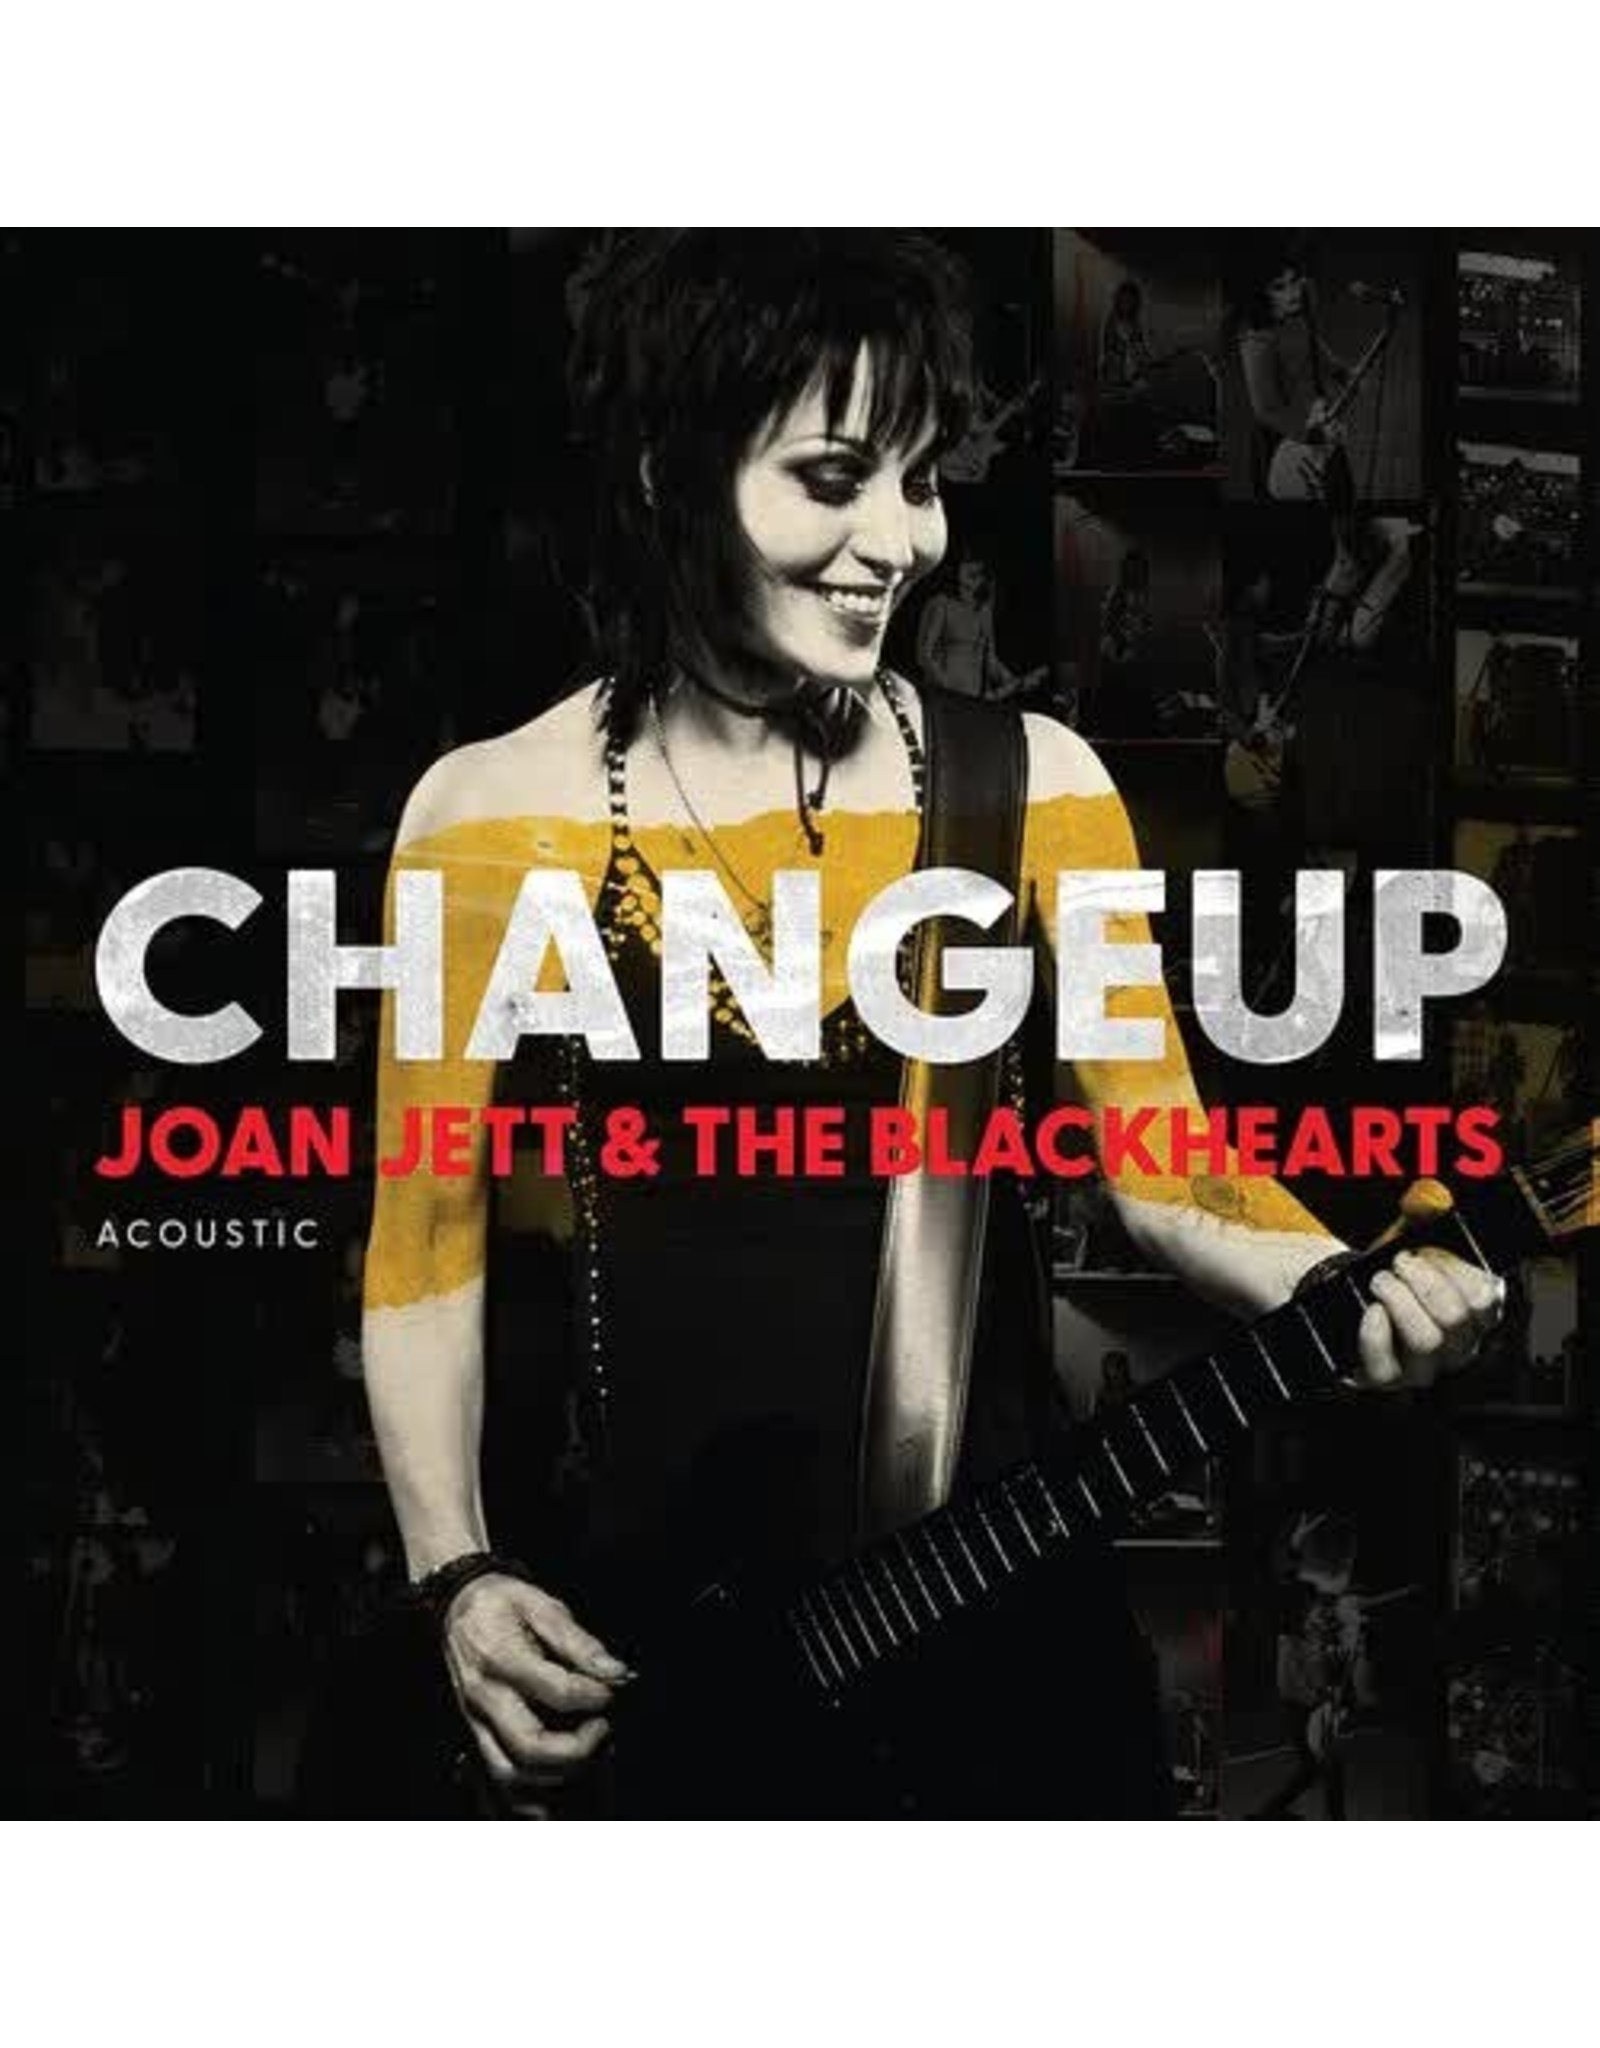 Jett, Joan and the Blackhearts - Change Up Acoustic LP